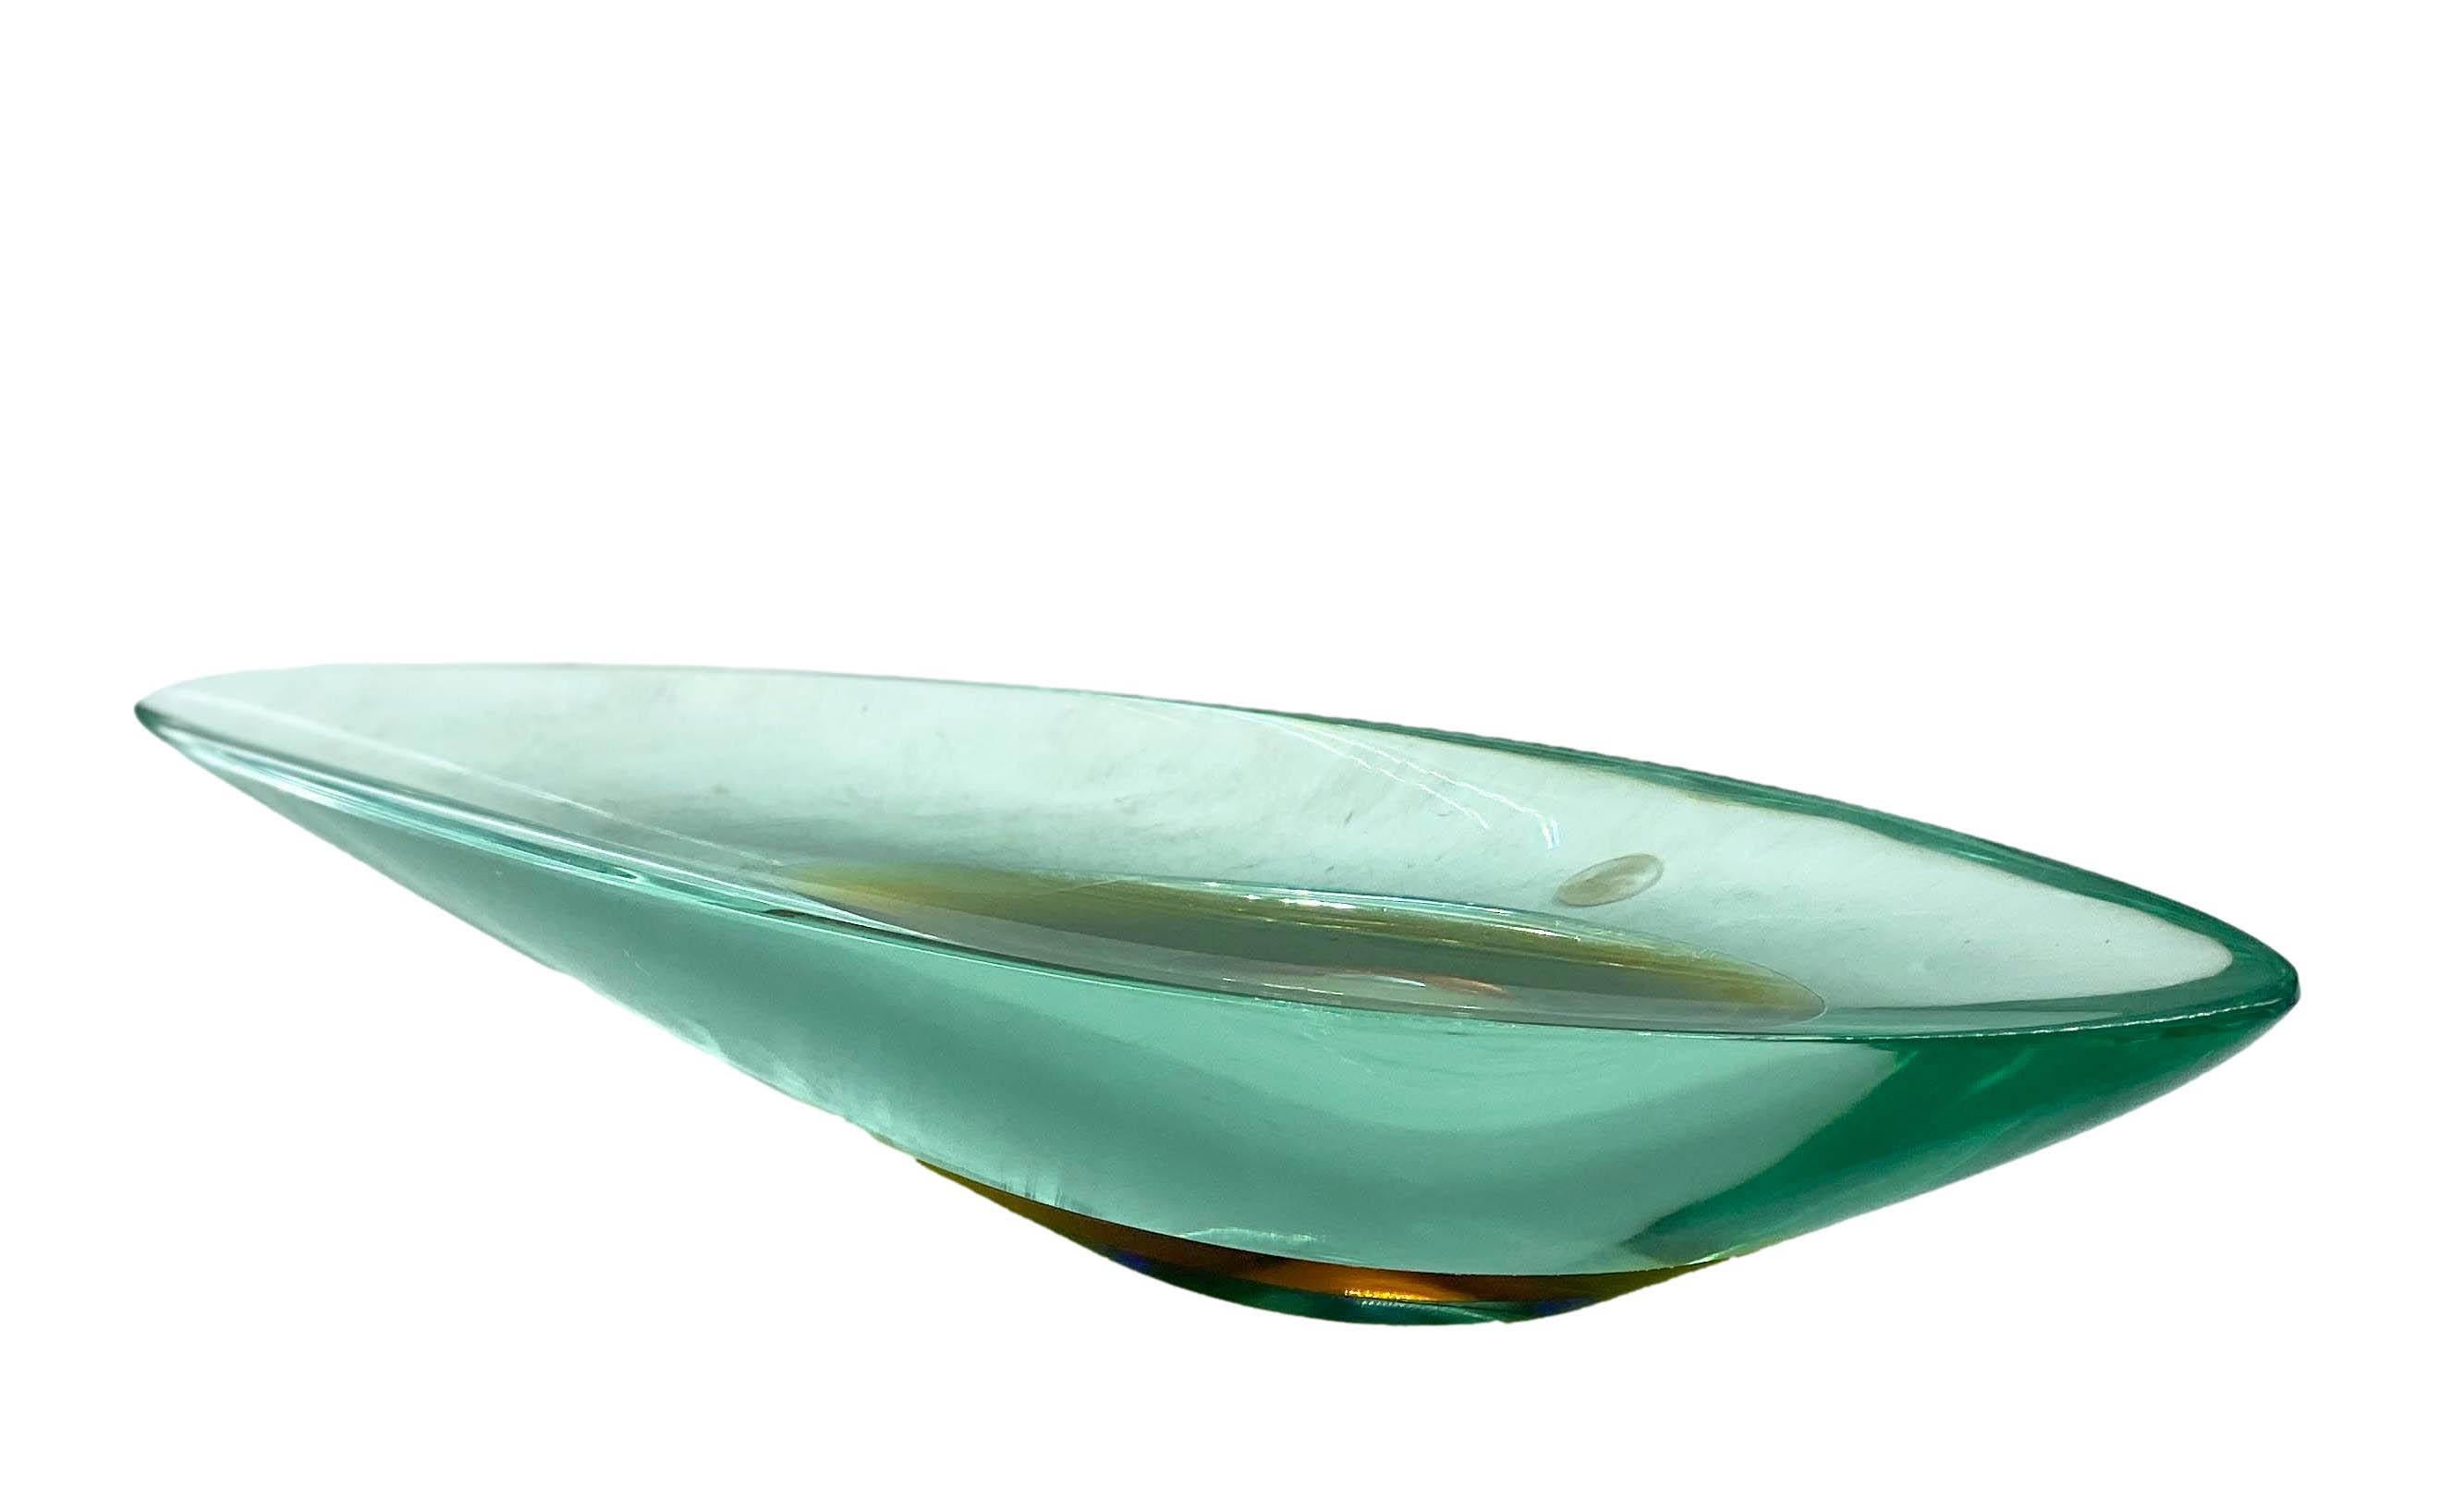 Rare submerged Murano glass centrepiece/emptying tray by Fontana Arte, engraved FX, with colour nuances from Nile green to yellow, blue and amber, Italy 1960